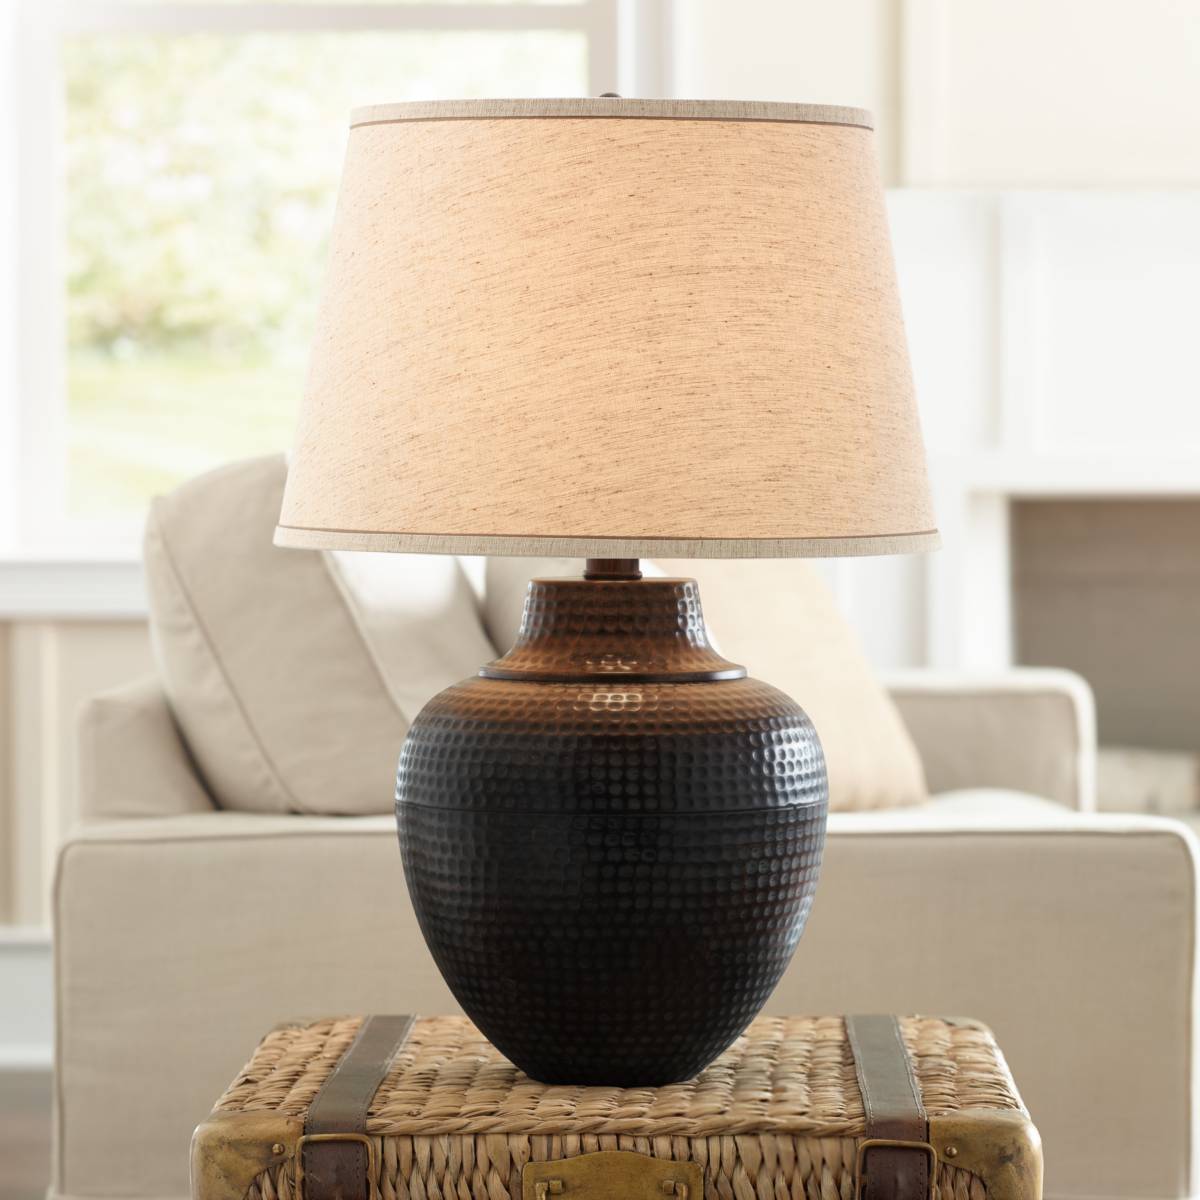 Rustic Table Lamps - Lodge and Cabin Styles | Lamps Plus